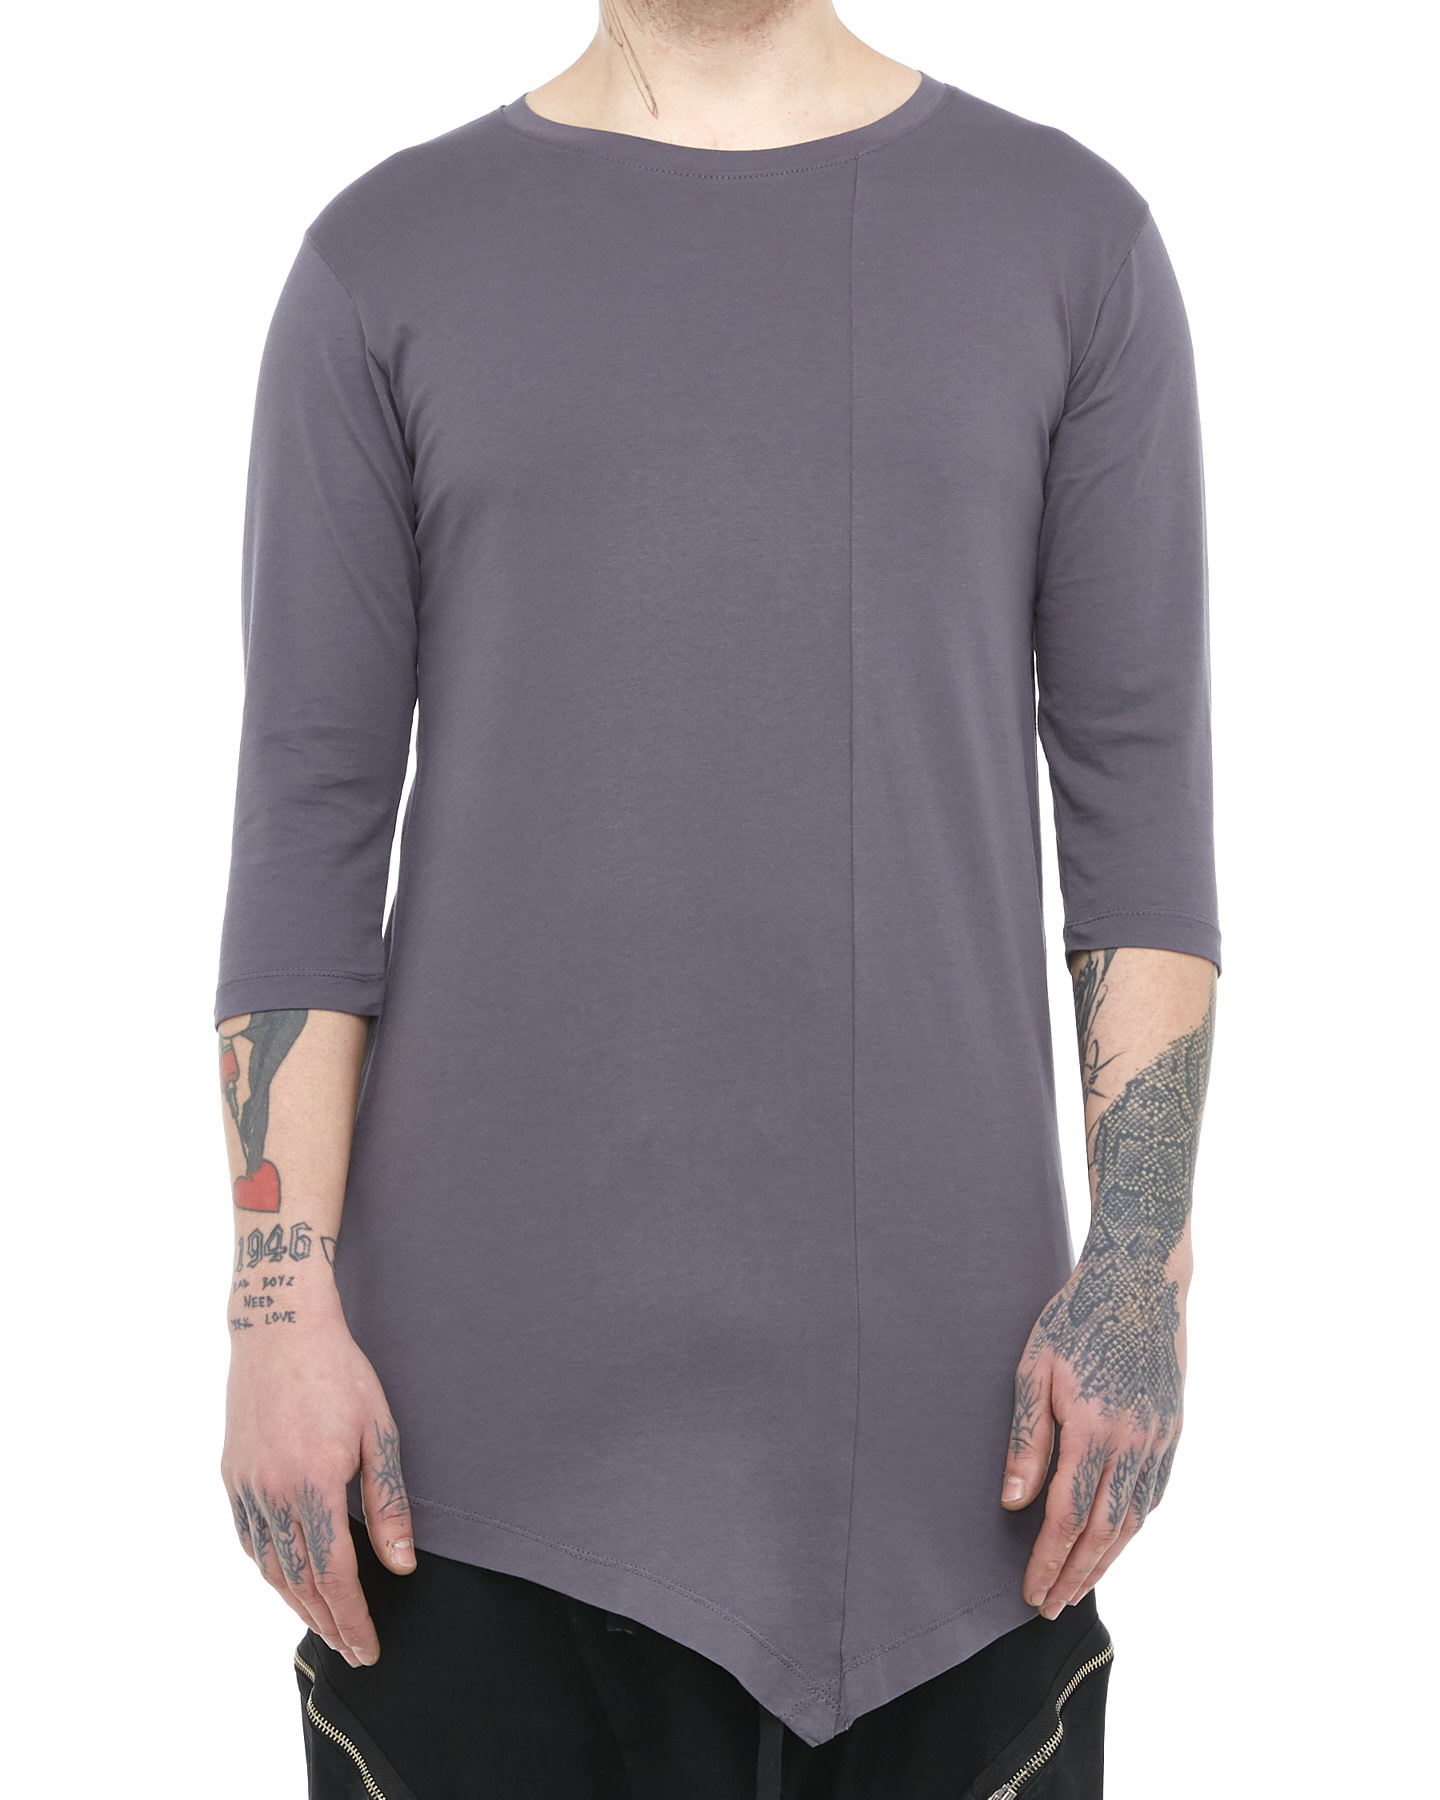 FITTED ASYMMETRIC 3/4 SLEEVE COTTON T-SHIRT - GREY